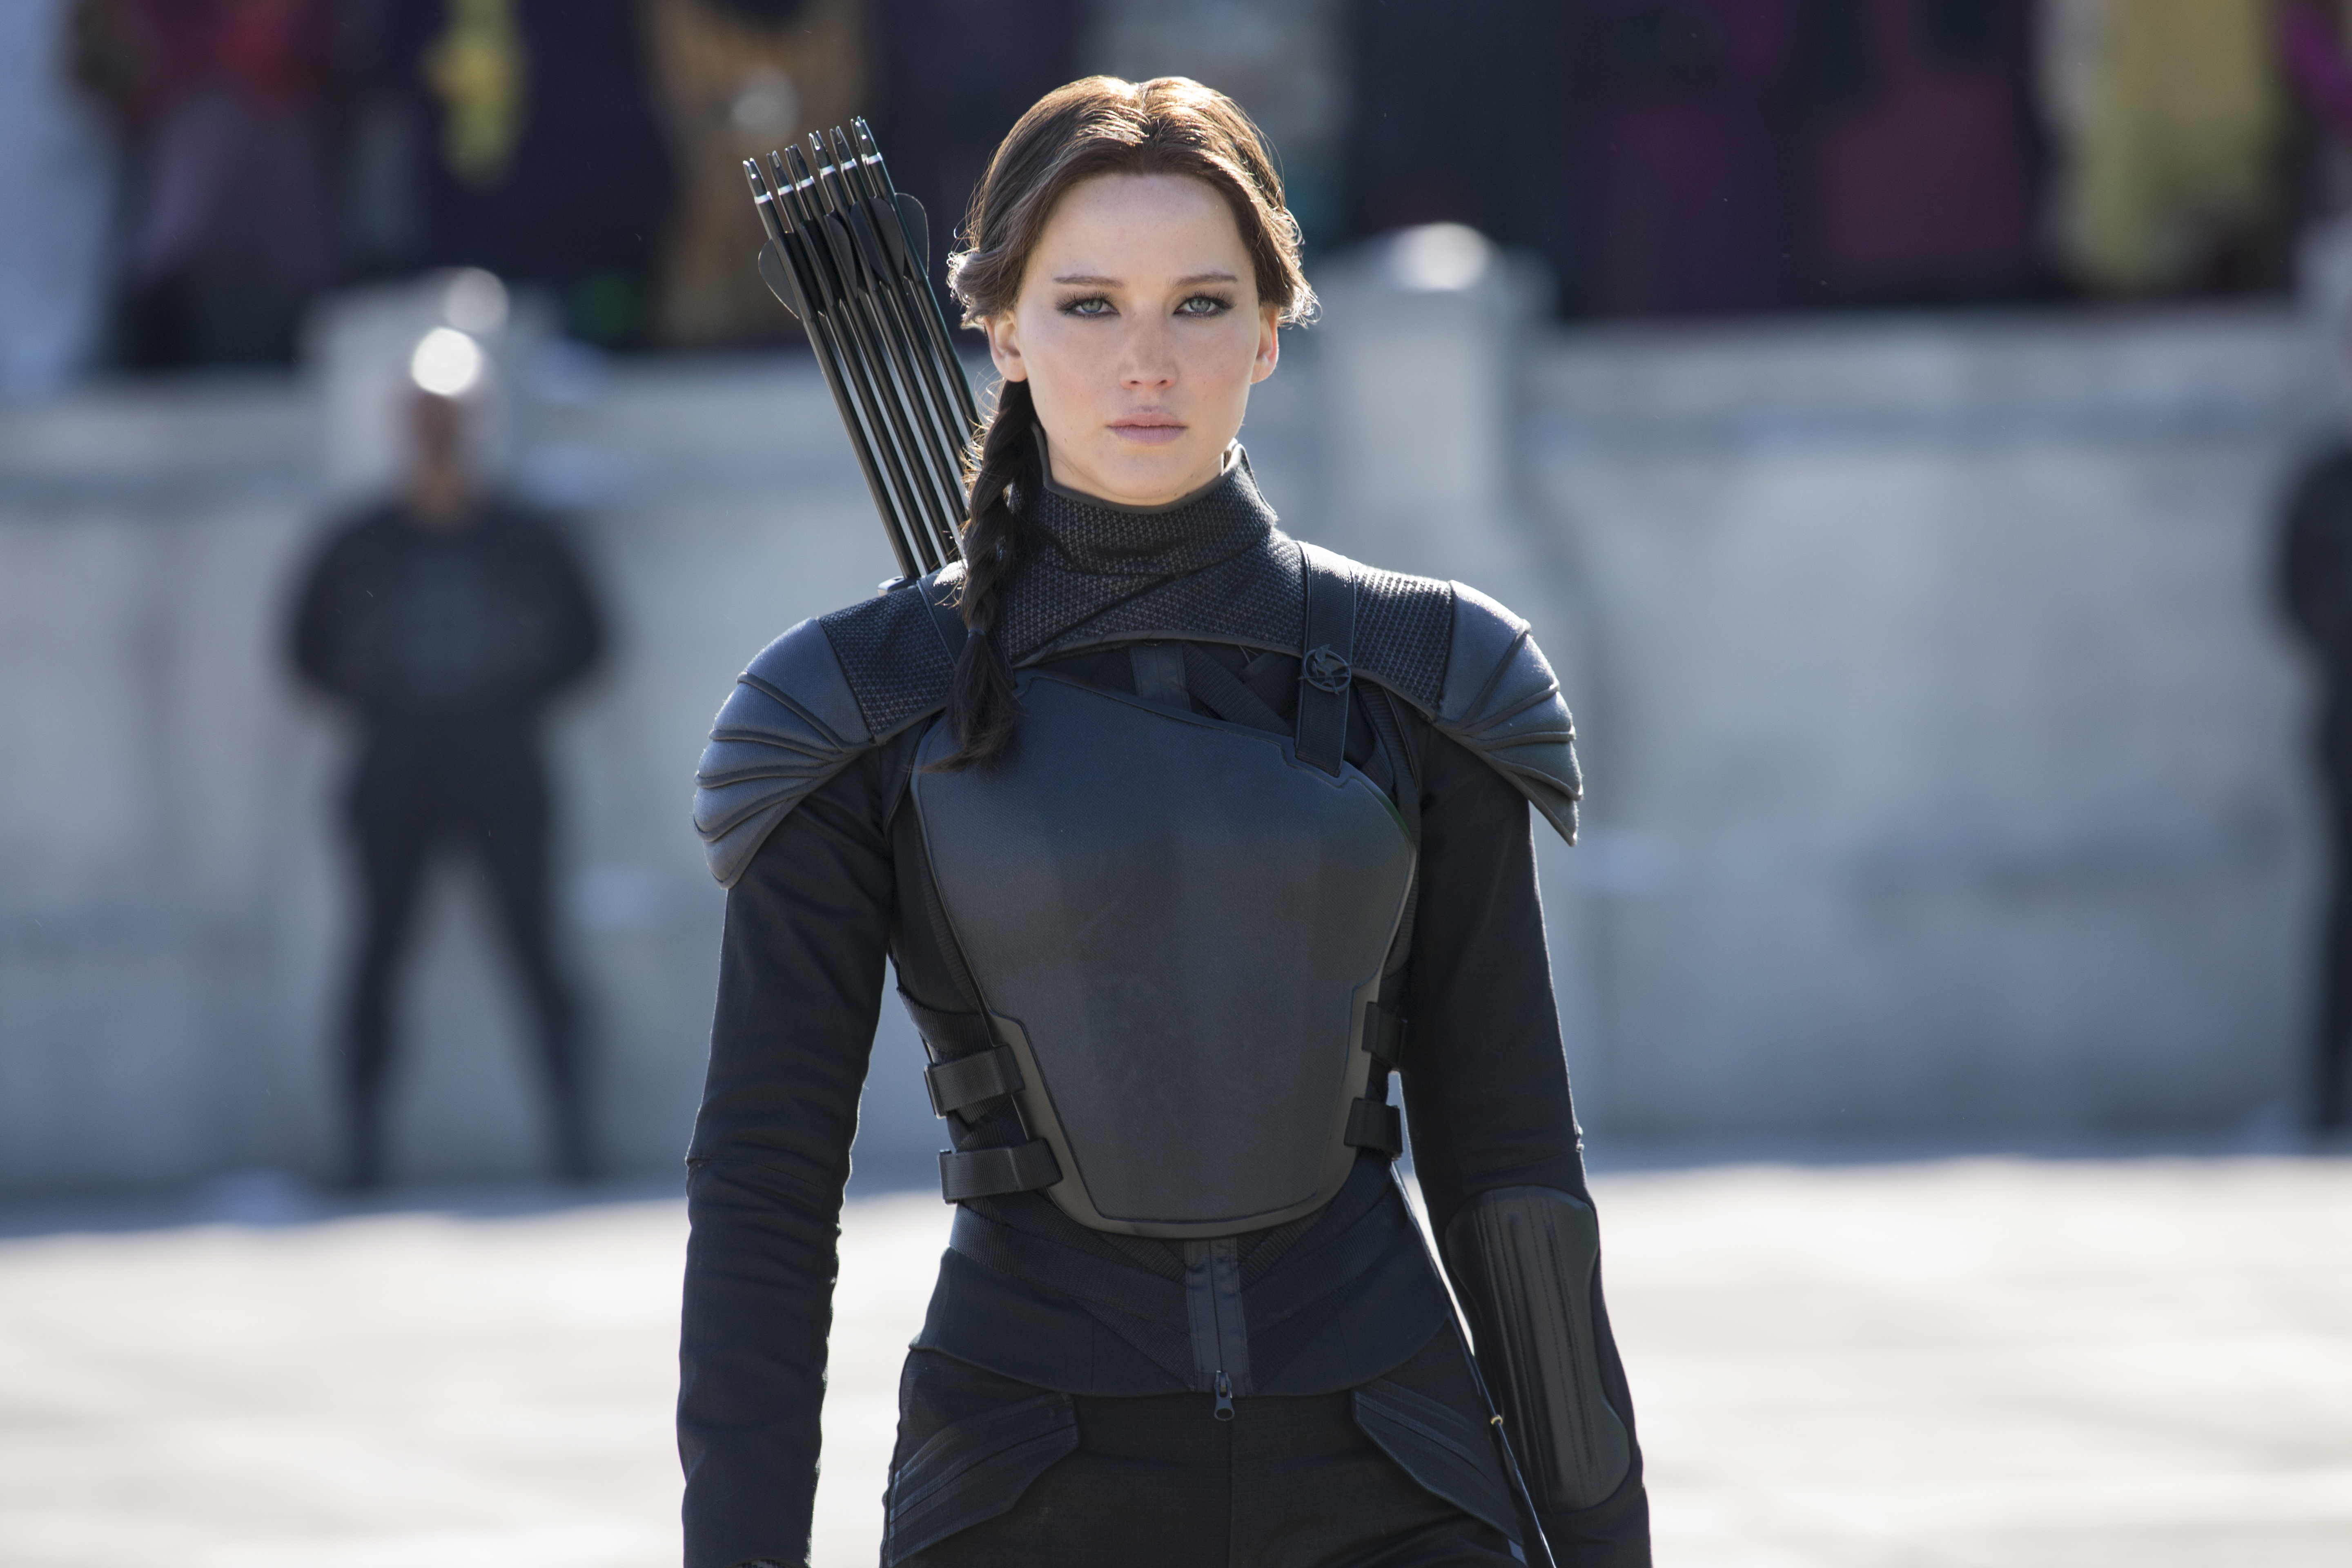 Katniss as played by Jennifer Lawrence, looking particularly deadly as she marches across ready to execute President Snow